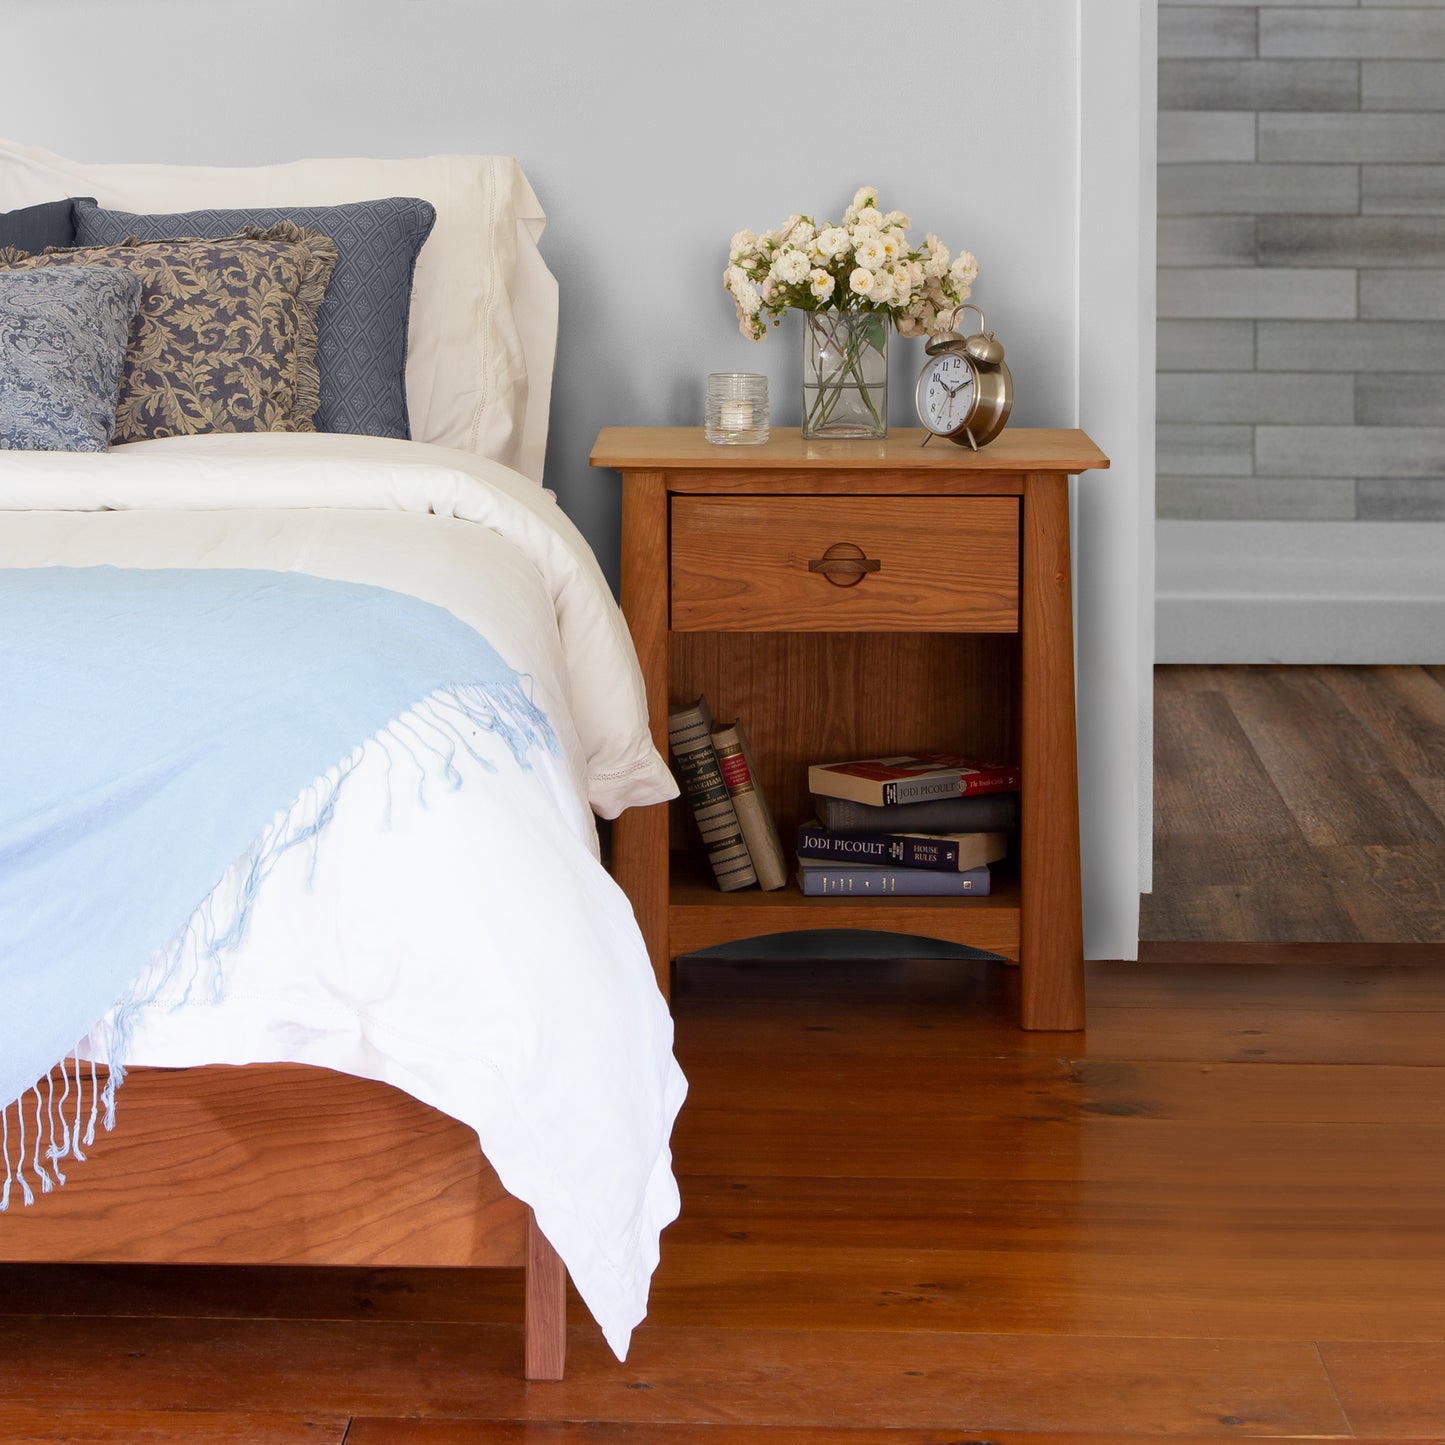 A neatly made bed with a blue and white blanket, beside a Maple Corner Woodworks Cherry Moon 1-Drawer Enclosed Shelf Nightstand holding flowers, books, and a clock, in a room with sustainably harvested hardwood flooring.